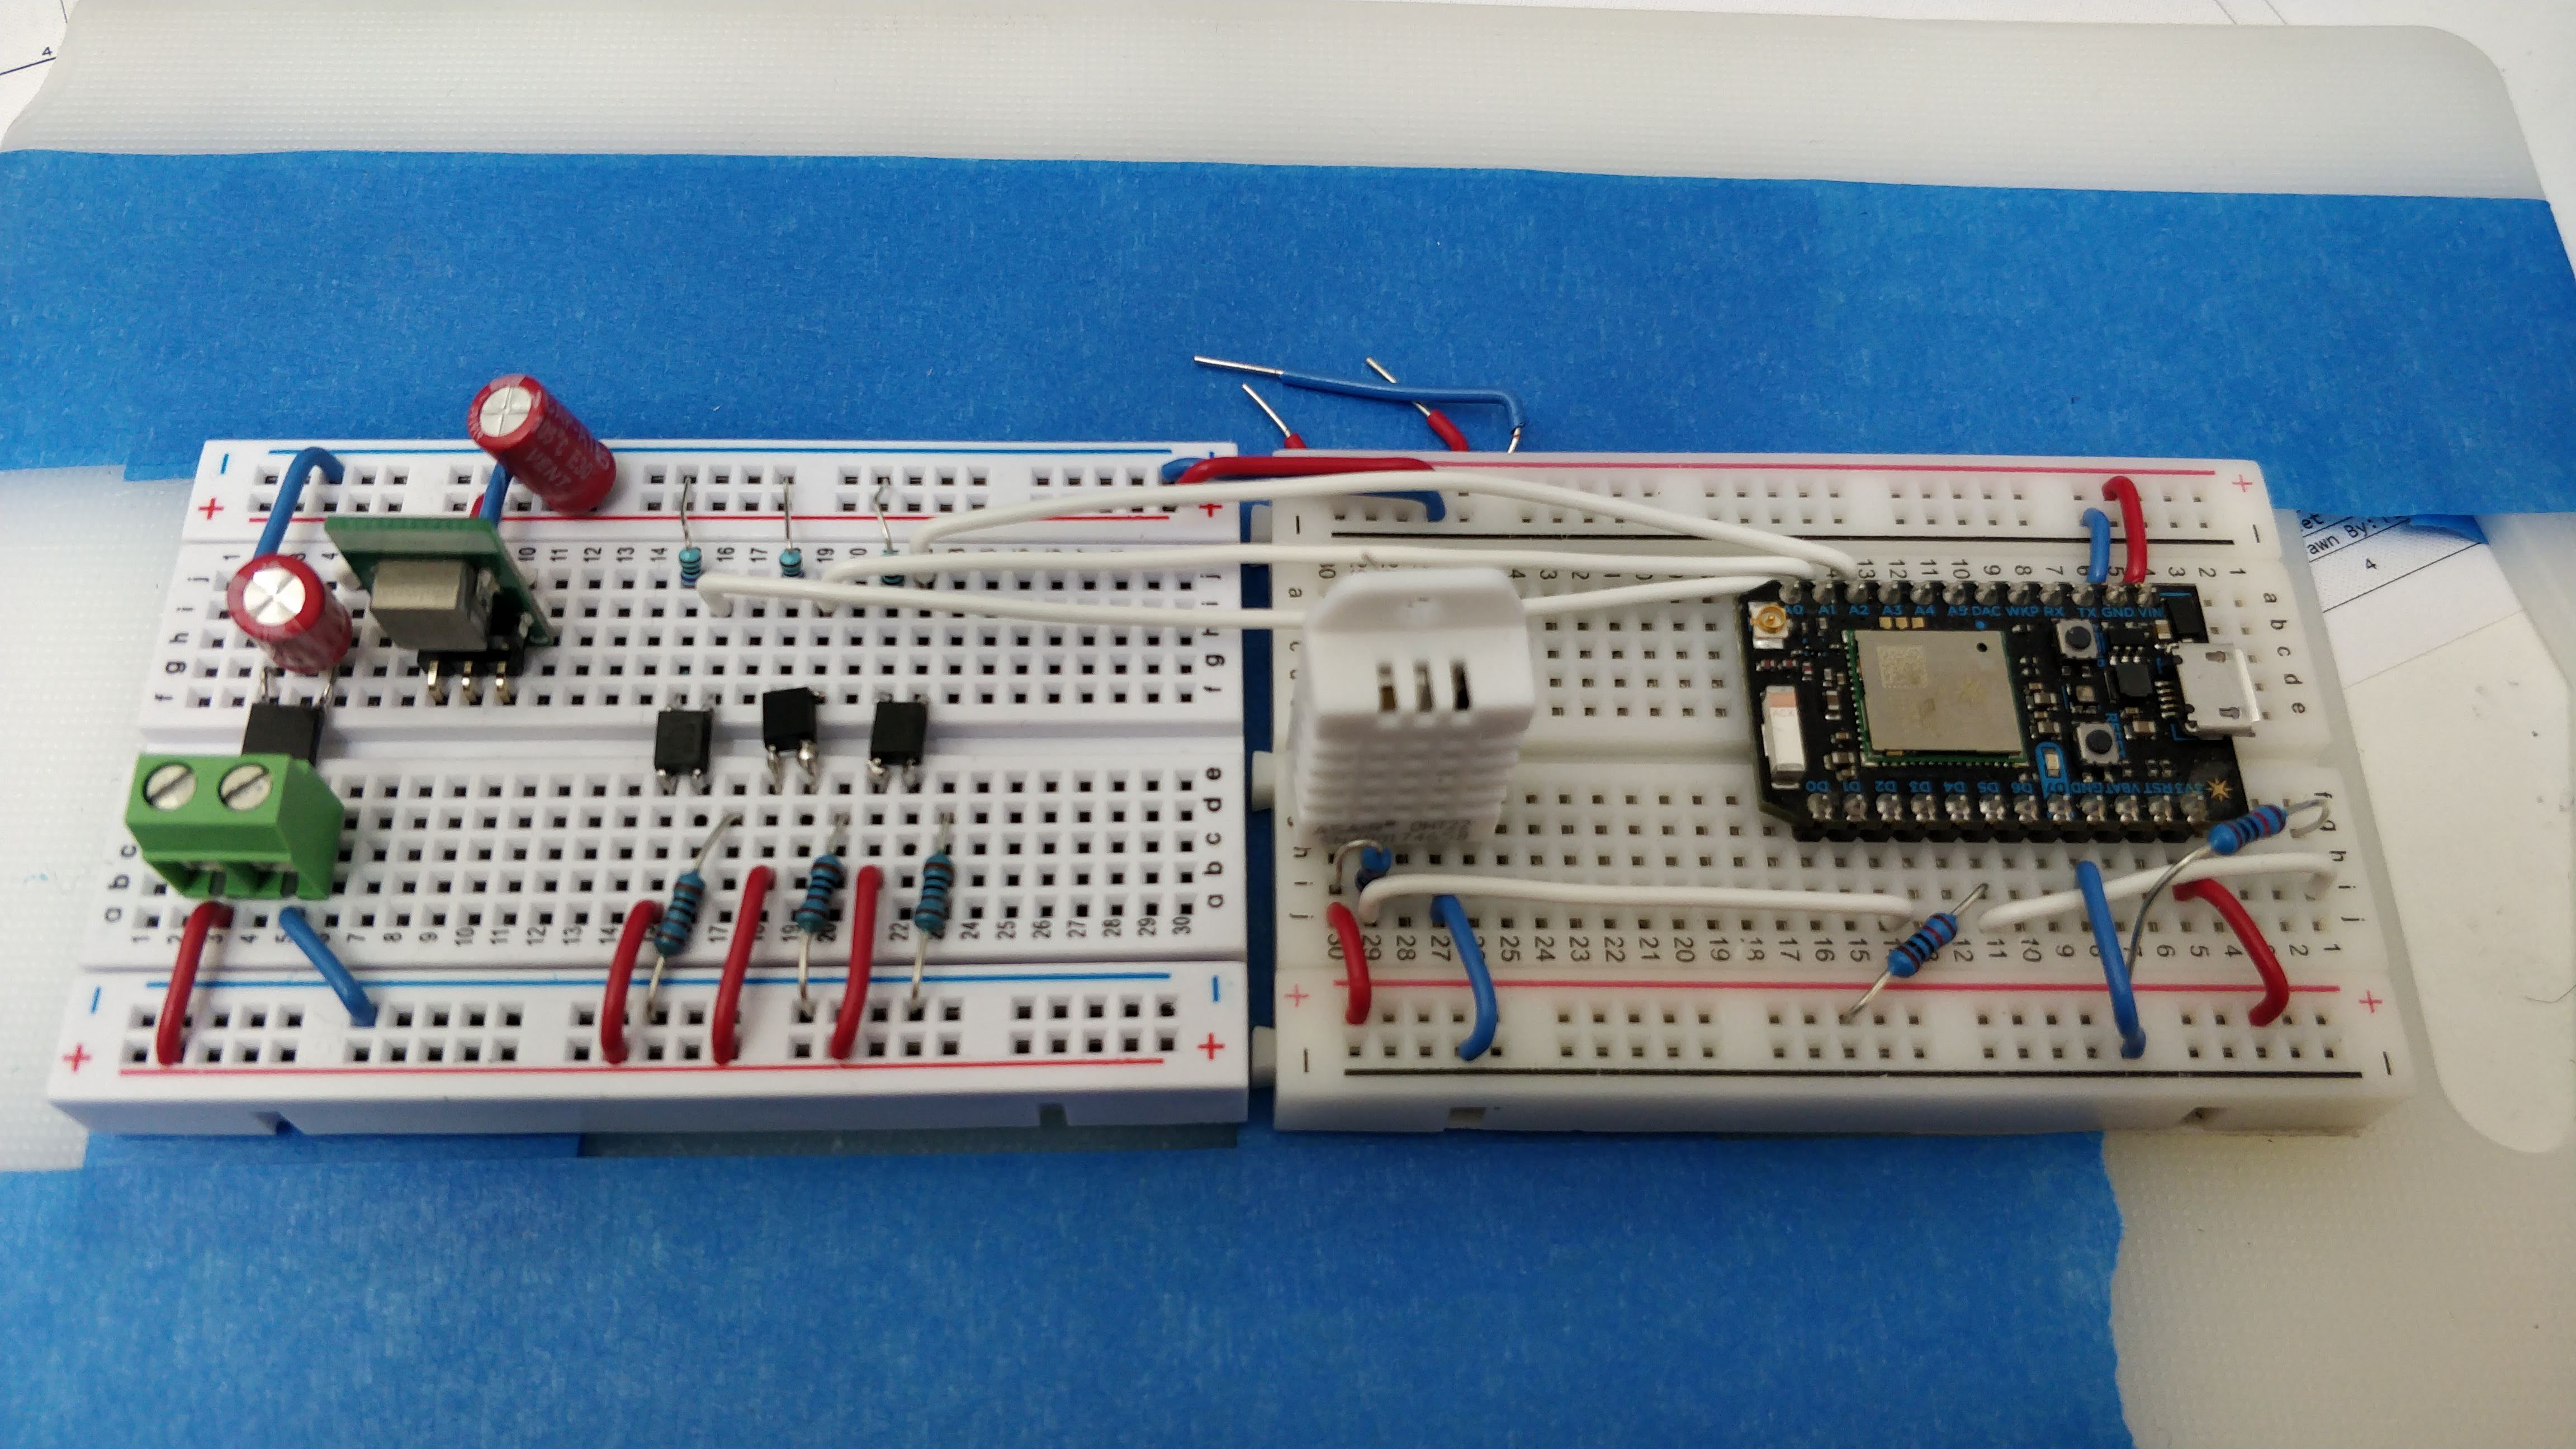 Breadboard with power, relays, on-board sensor, and core